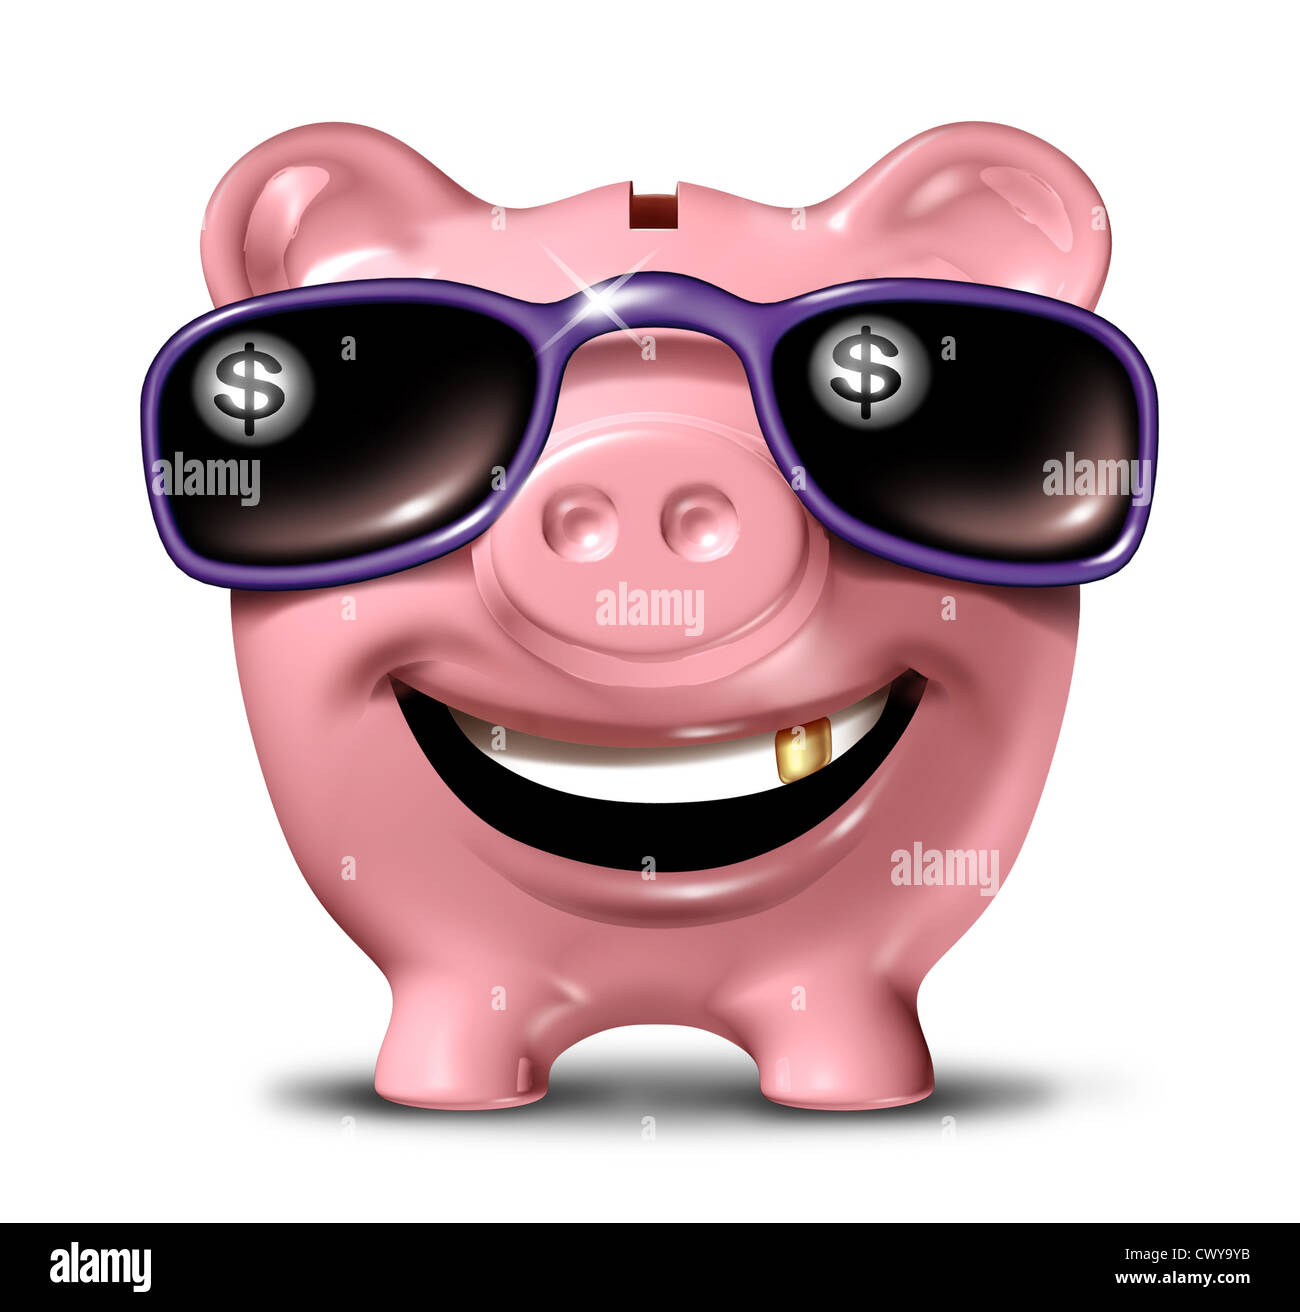 Successful savings financial concept with a happy smiling piggy bank wearing dark sunglasses with a dollar symbol reflection in Stock Photo